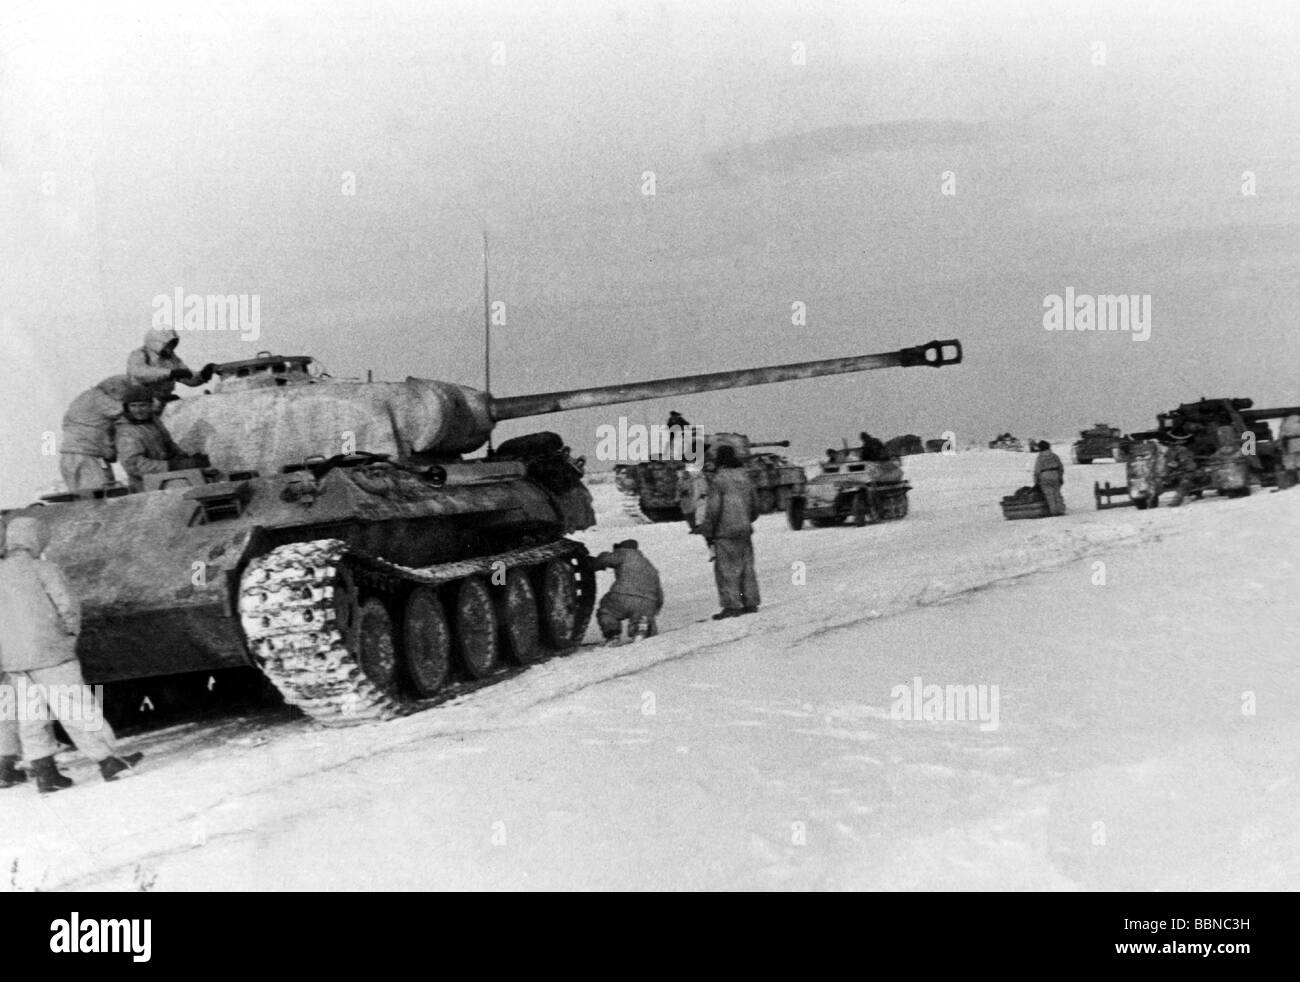 events, Second World War / WWII, Russia 1944 / 1945, German tank unit near Krassnekoye, early 1944, in the foreground a 'Panther' tank, right hand an 88 mm anti-aricraft gun Flak 36/37, Stock Photo